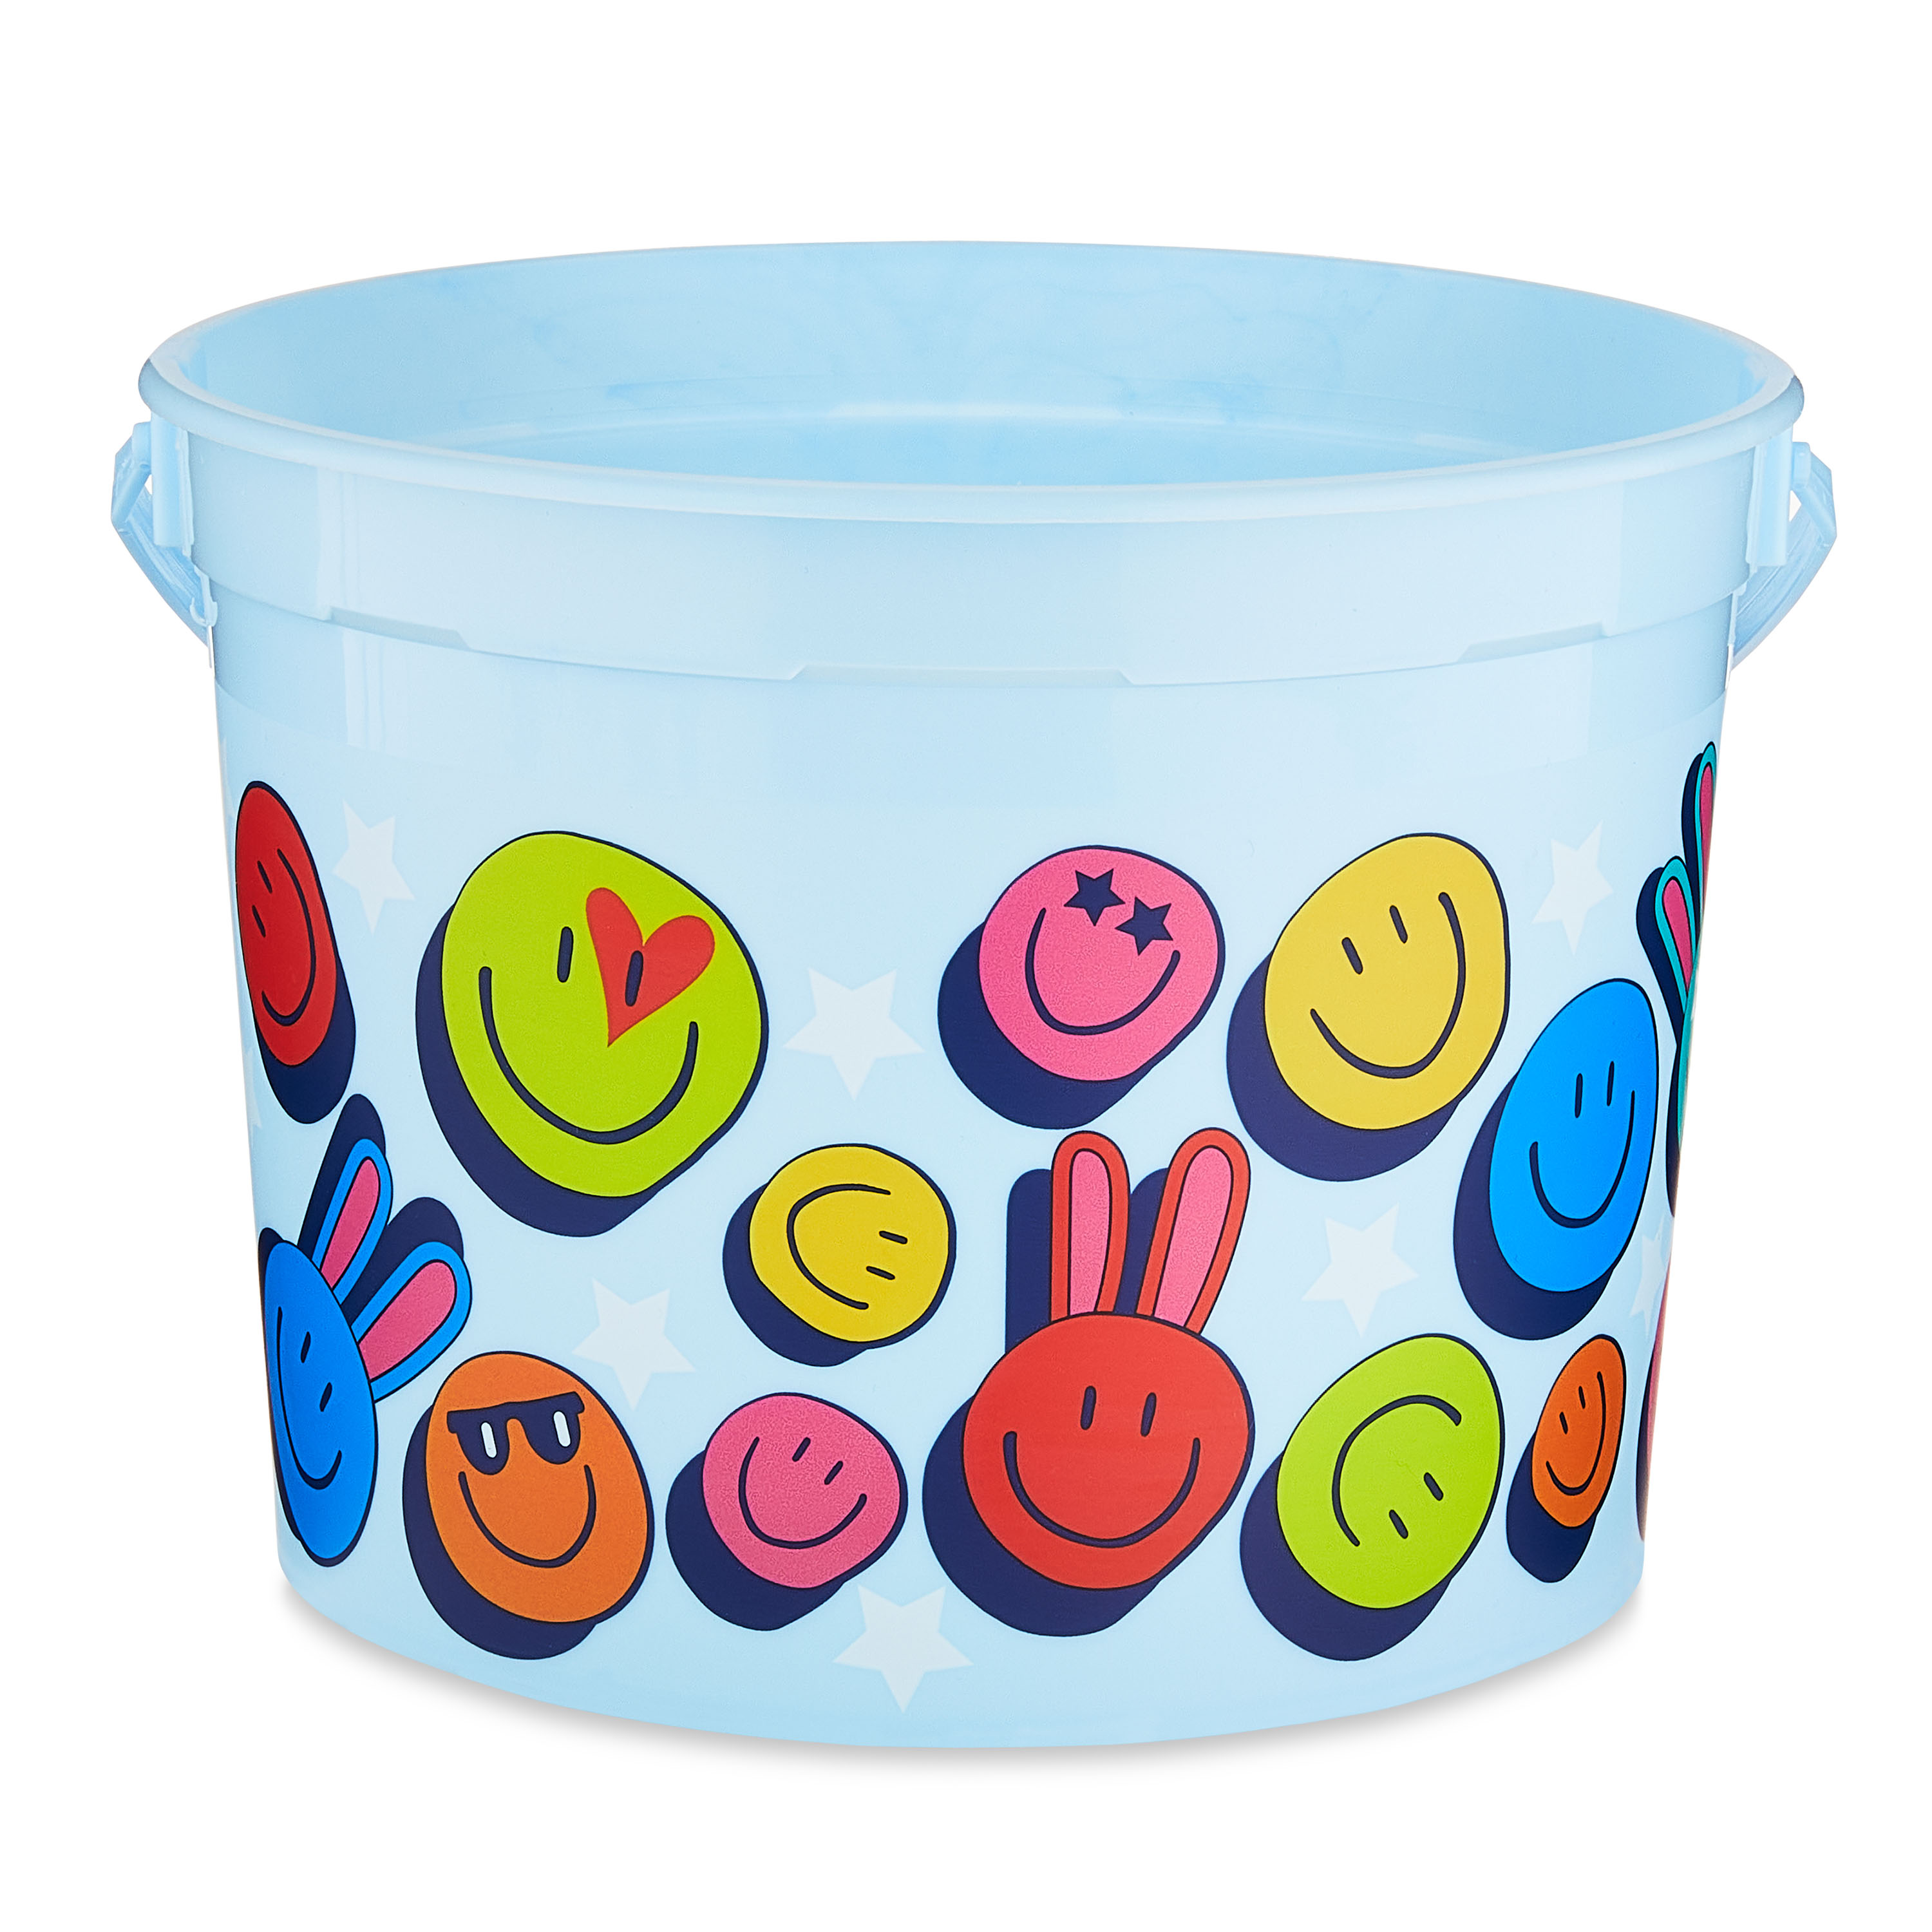 Easter 5-Quart Plastic Bucket, Blue Smileys, by Way To Celebrate - image 4 of 5